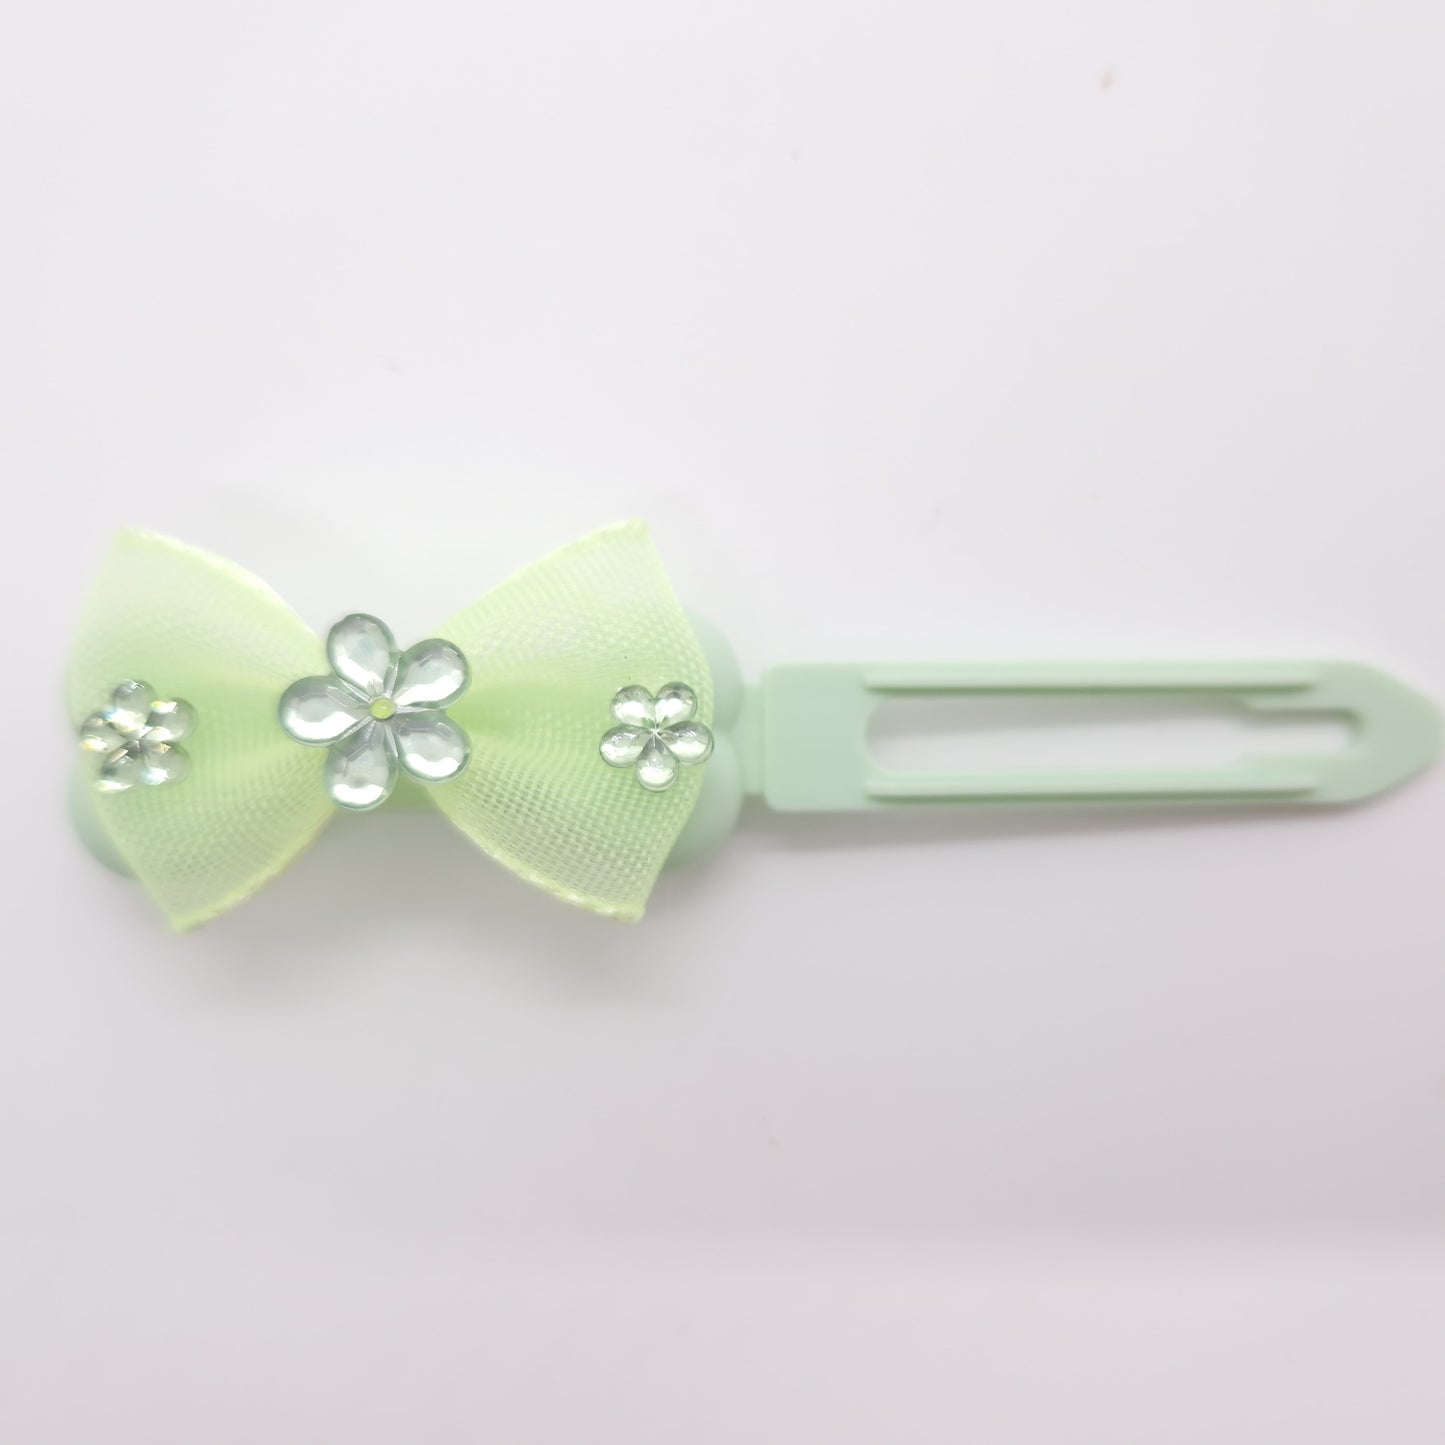 Soft Netted Bow with Flower Gems on 4.5cm & 3.5cm Clip